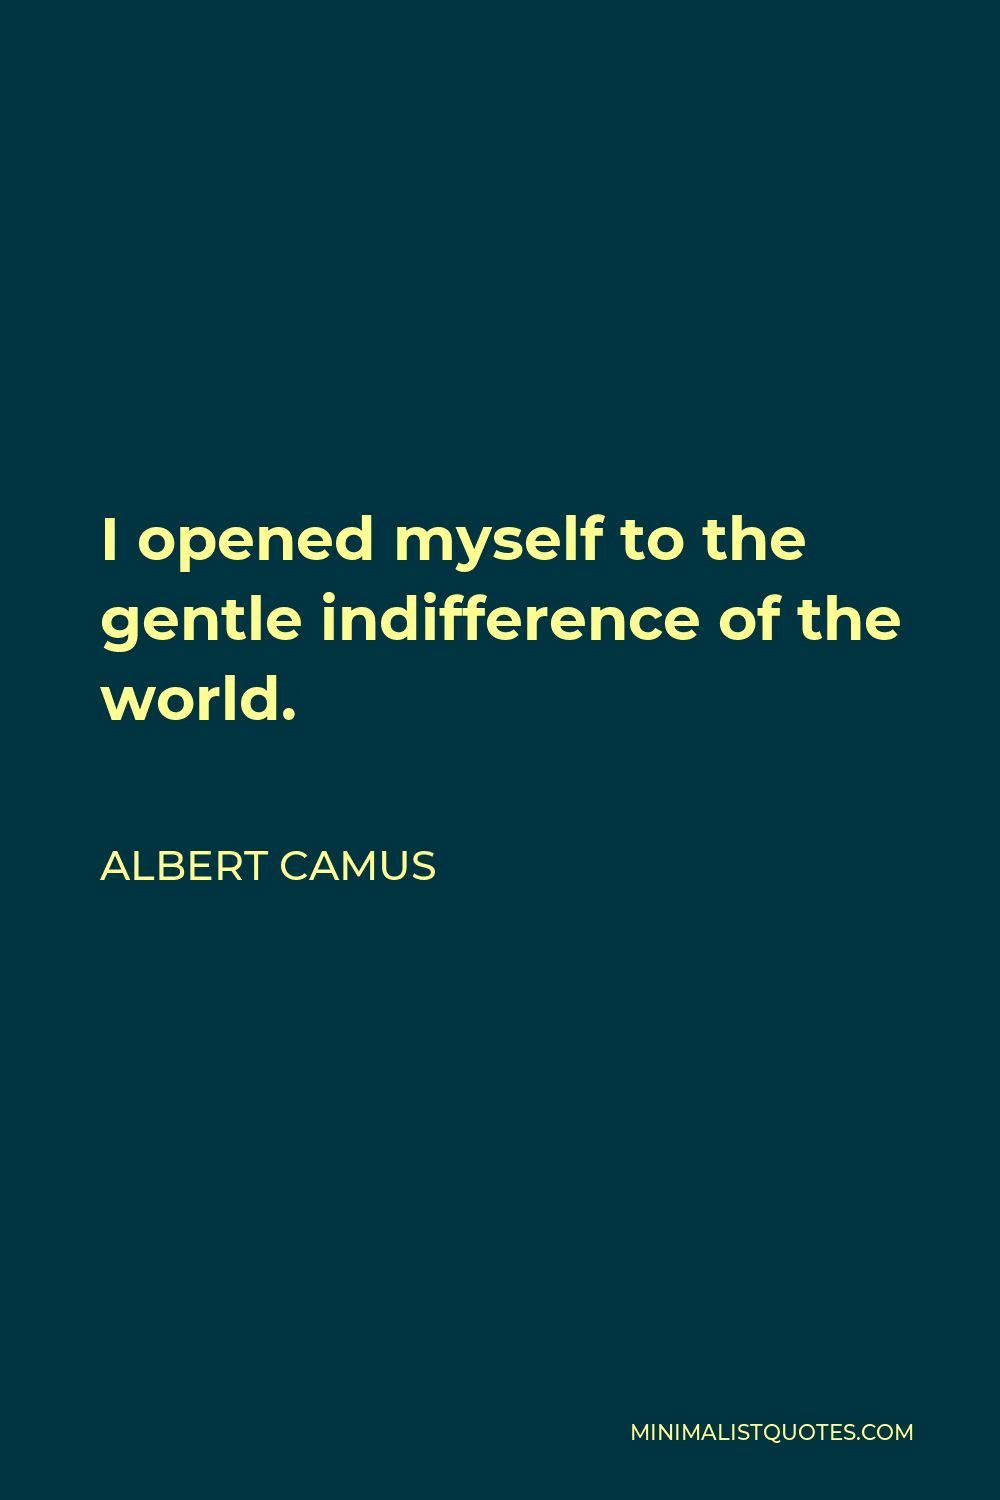 Albert Camus Quote - I opened myself to the gentle indifference of the world.